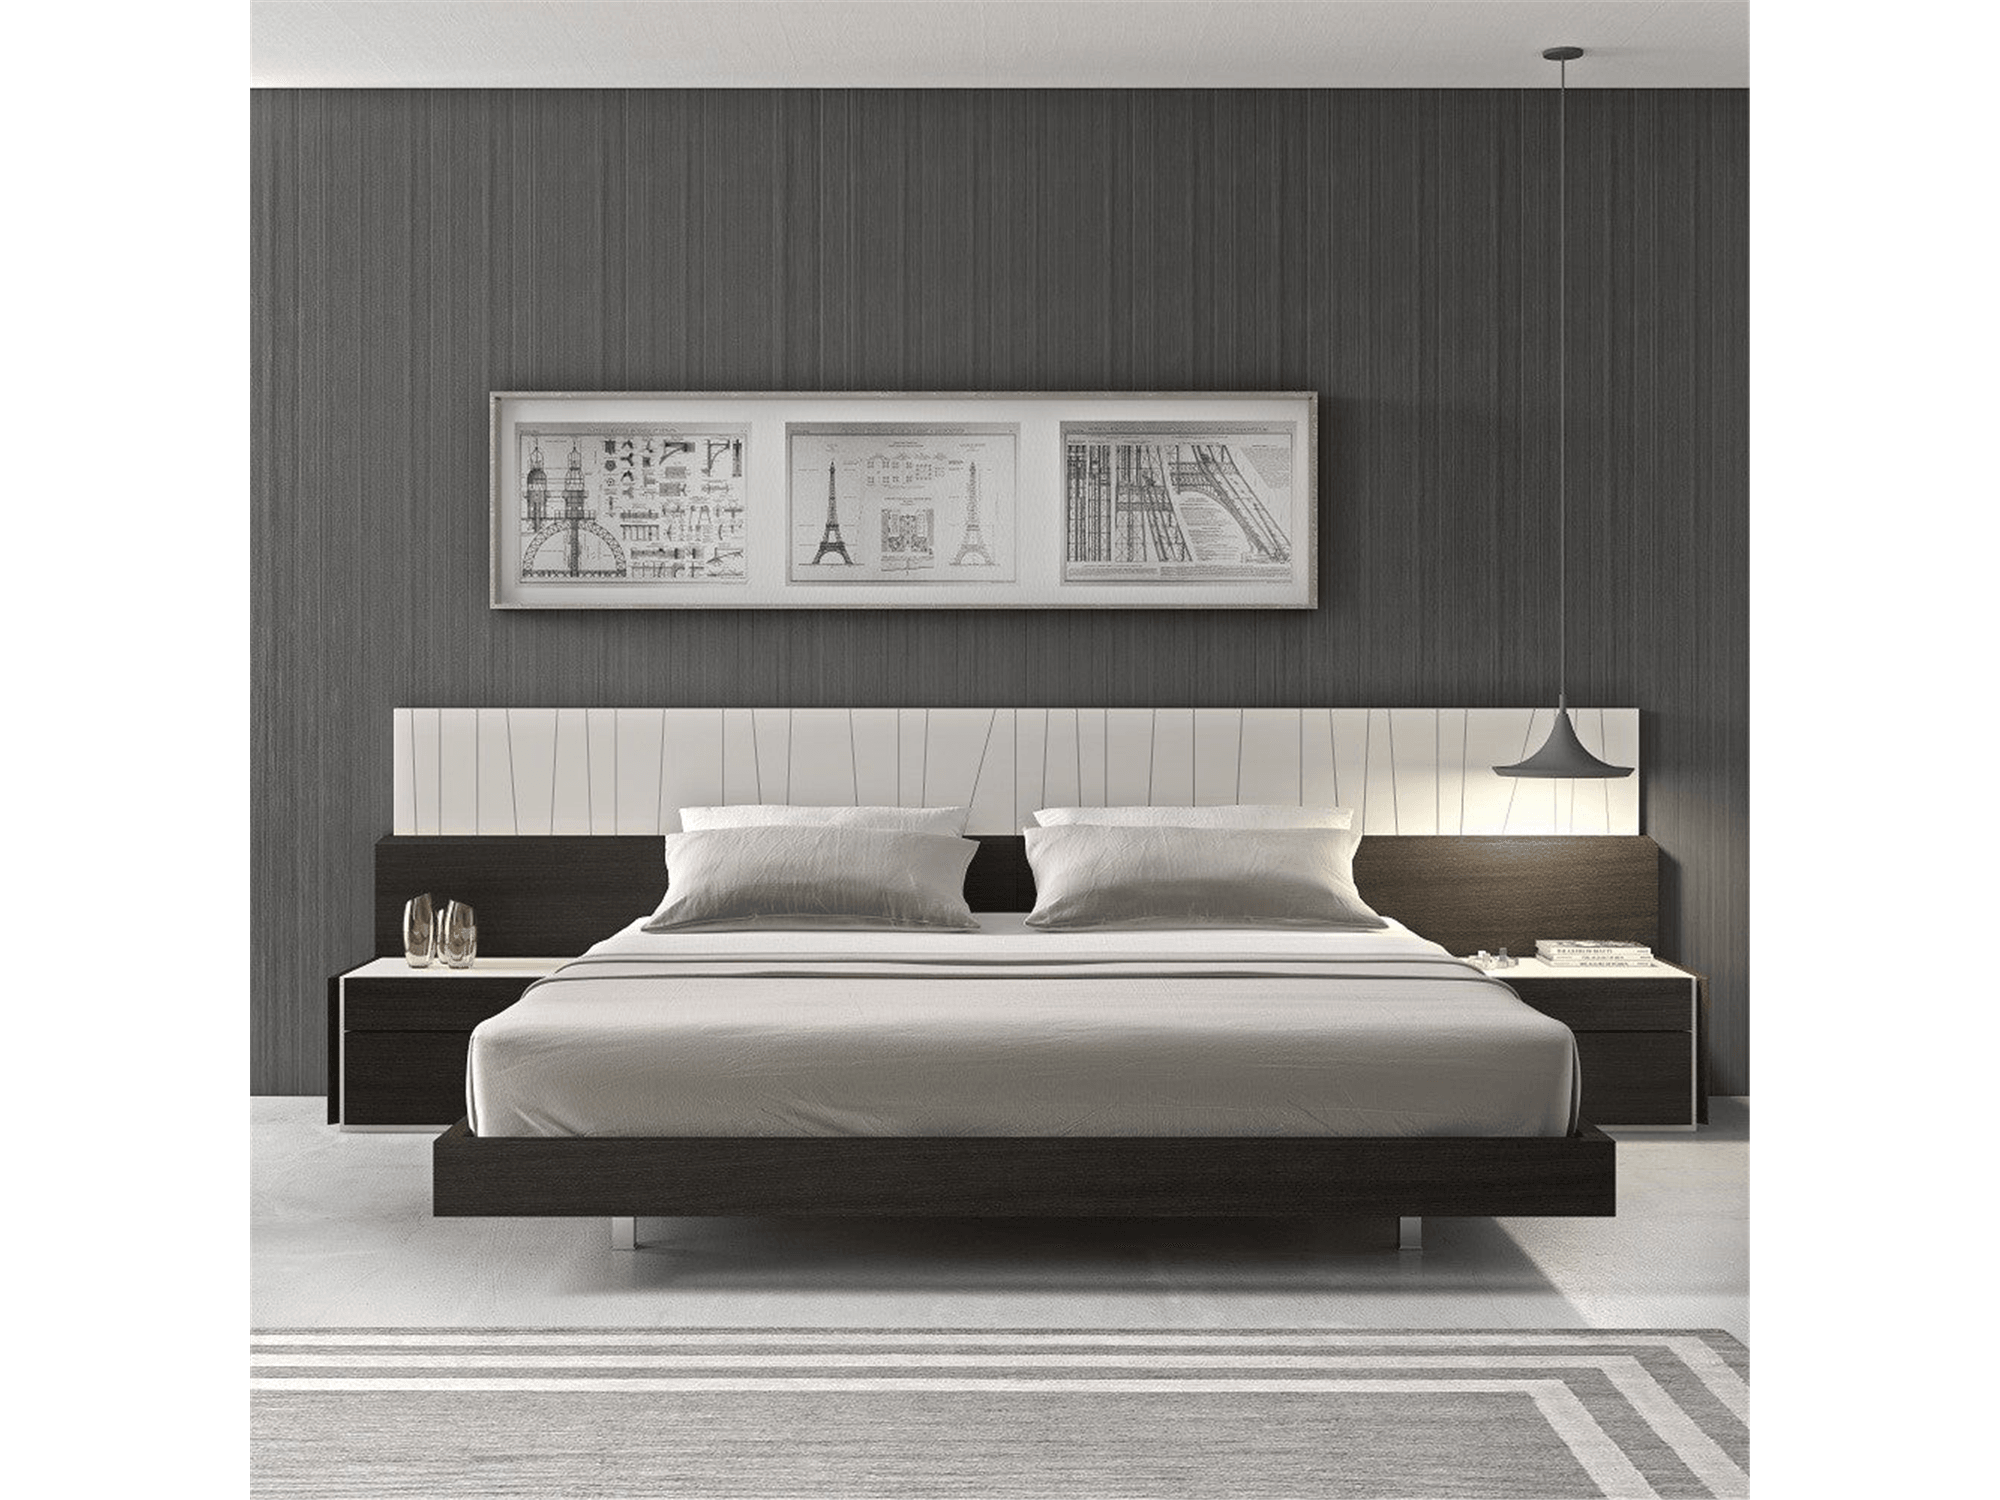 Pablo Bedroom Collection - Euro Living Furniture